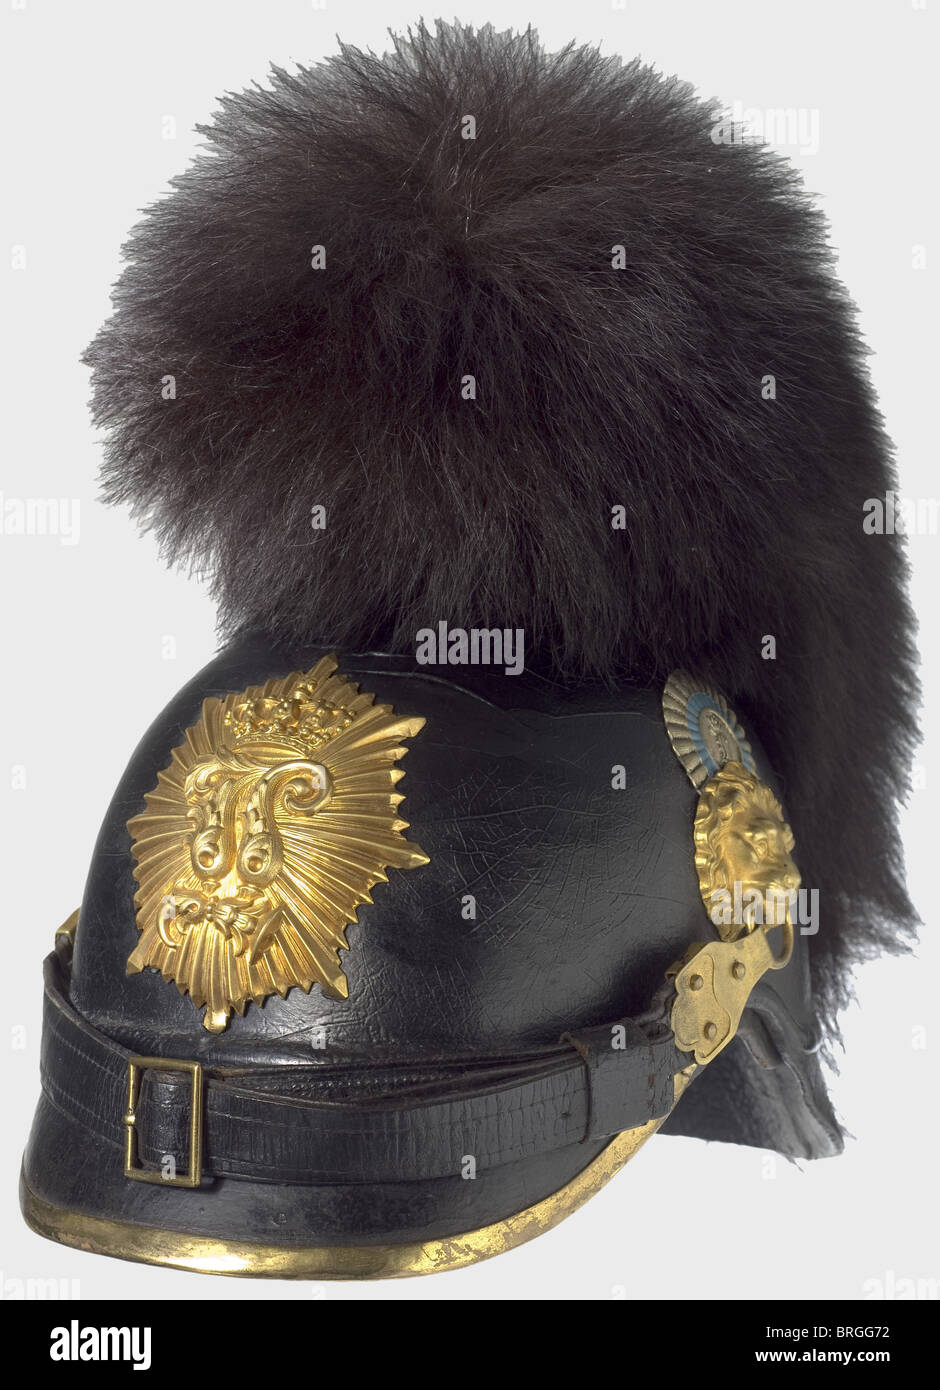 A model 1868 helmet for officers,of the Reserve and Landwehr of the Royal Bavarian Infantry Especially light skull of lacquered felt. Gilded mountings with the special emblem for reserve and Landwehr officers. Silver-plated officers' cockade. Chin straps on lion heads. Leather lining. Bearskin crest. This model was only worn between 1881 and 1886 This helmet is illustrated in Seibold/Schulz,Die Helme der kgl. Bayerischen Armee,p. 153.,historic,historical,19th century,Bavaria,Bavarian,German,Germany,Southern Germany,the South of Germany,object,obje,Additional-Rights-Clearences-Not Available Stock Photo